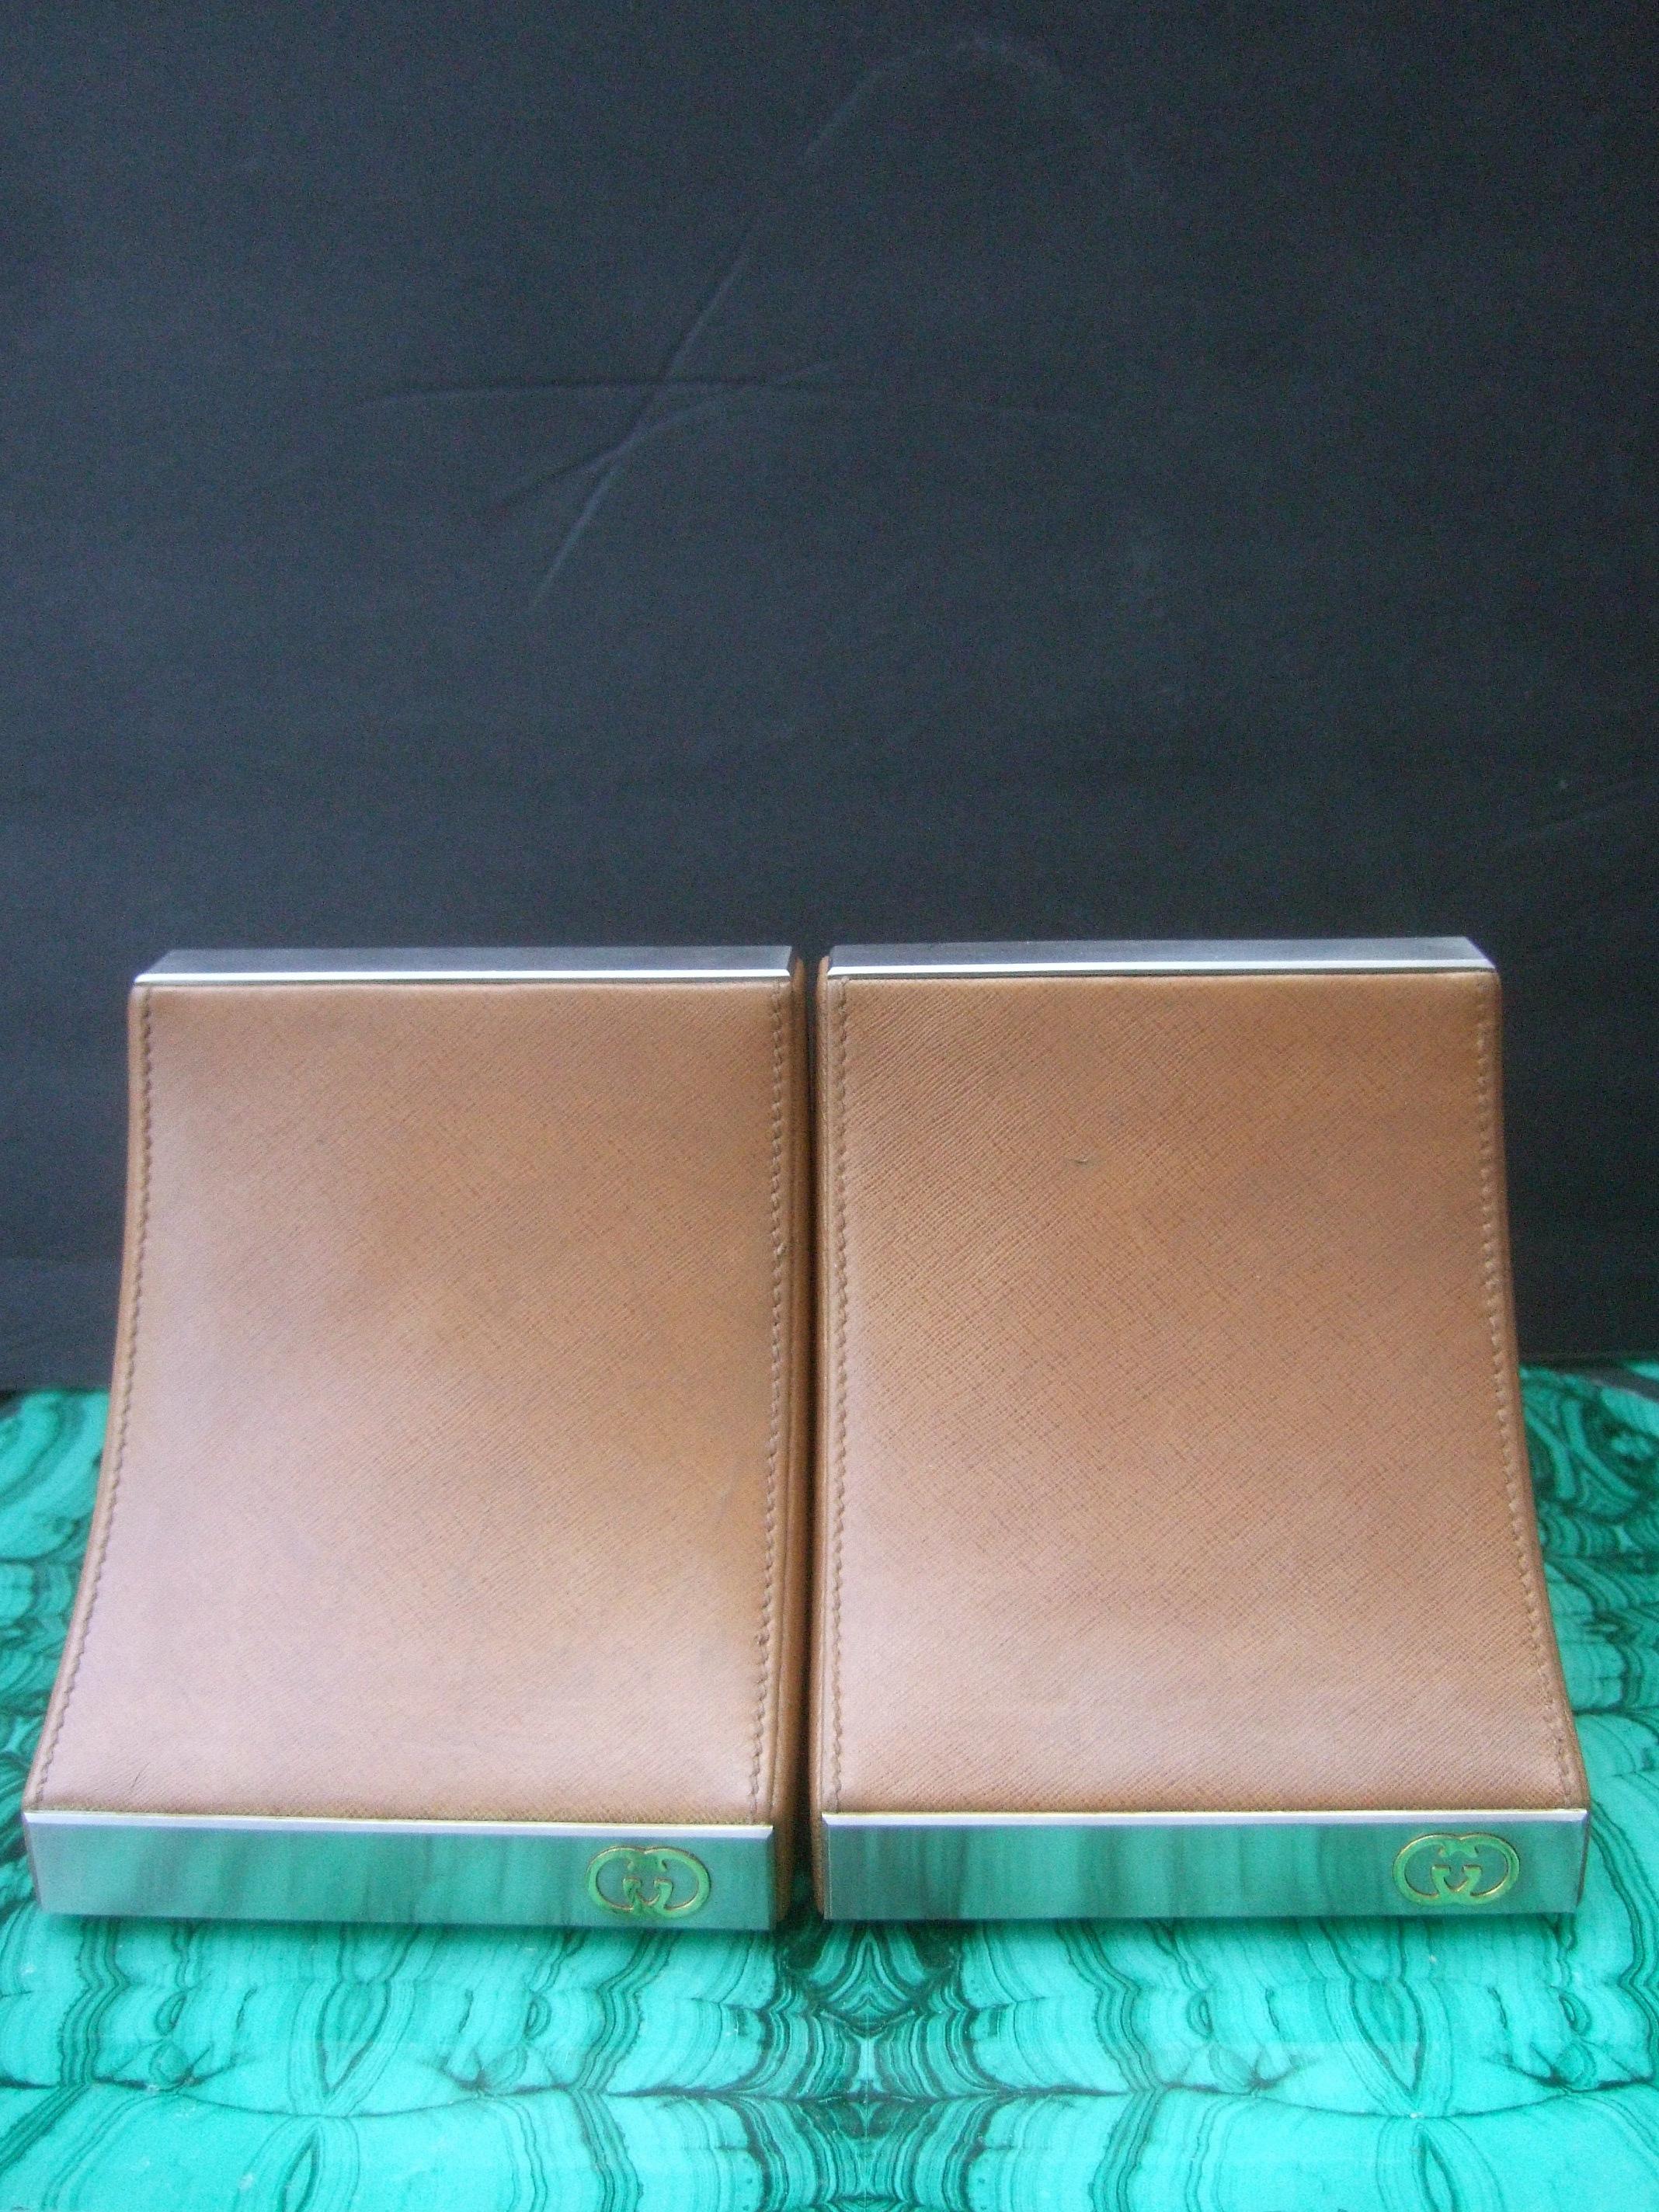 Gucci Italy Rare Caramel Brown Leather Pair of Bookends c 1970s  7